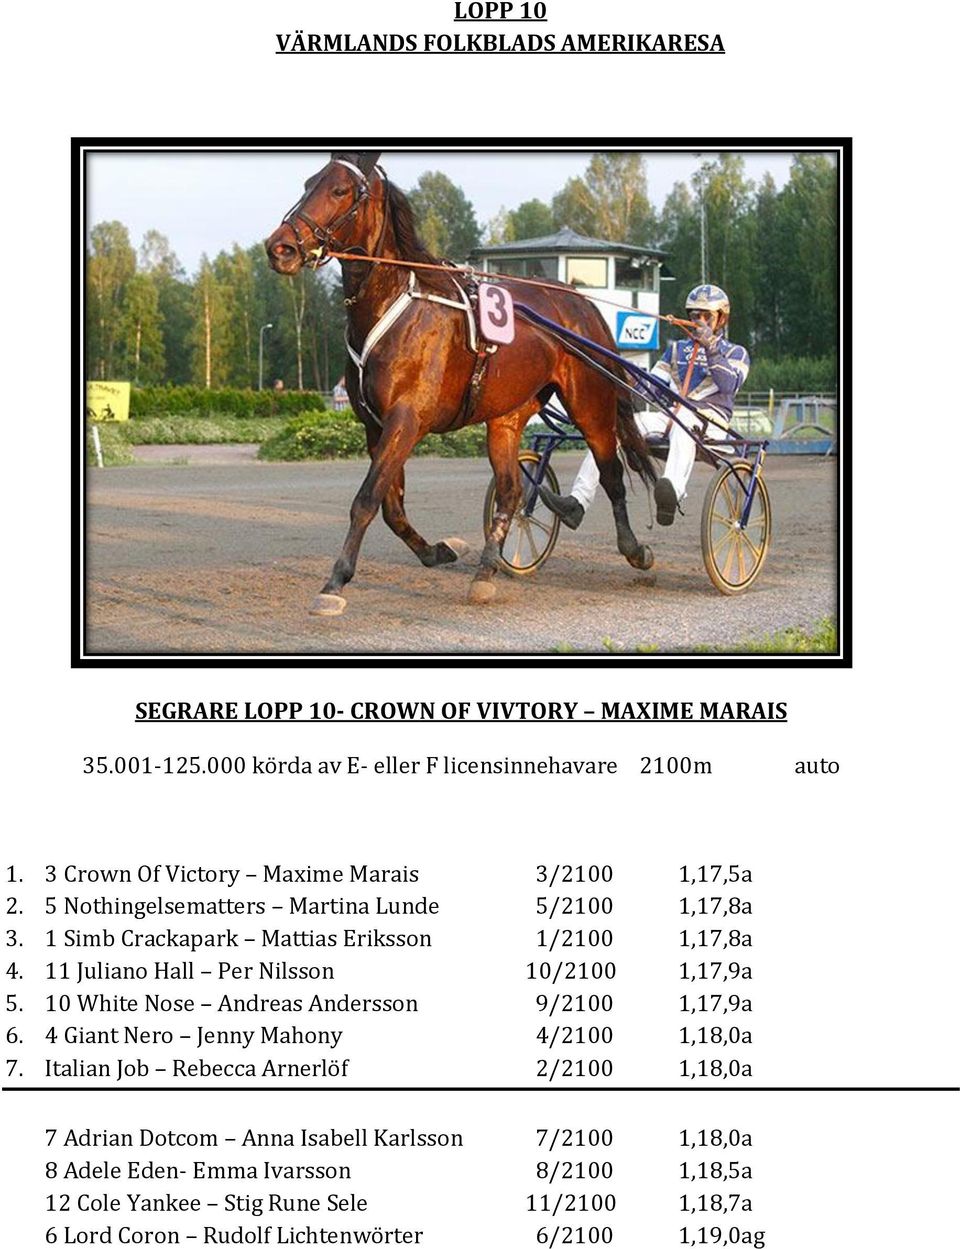 11 Juliano Hall Per Nilsson 10/2100 1,17,9a 5. 10 White Nose Andreas Andersson 9/2100 1,17,9a 6. 4 Giant Nero Jenny Mahony 4/2100 1,18,0a 7.